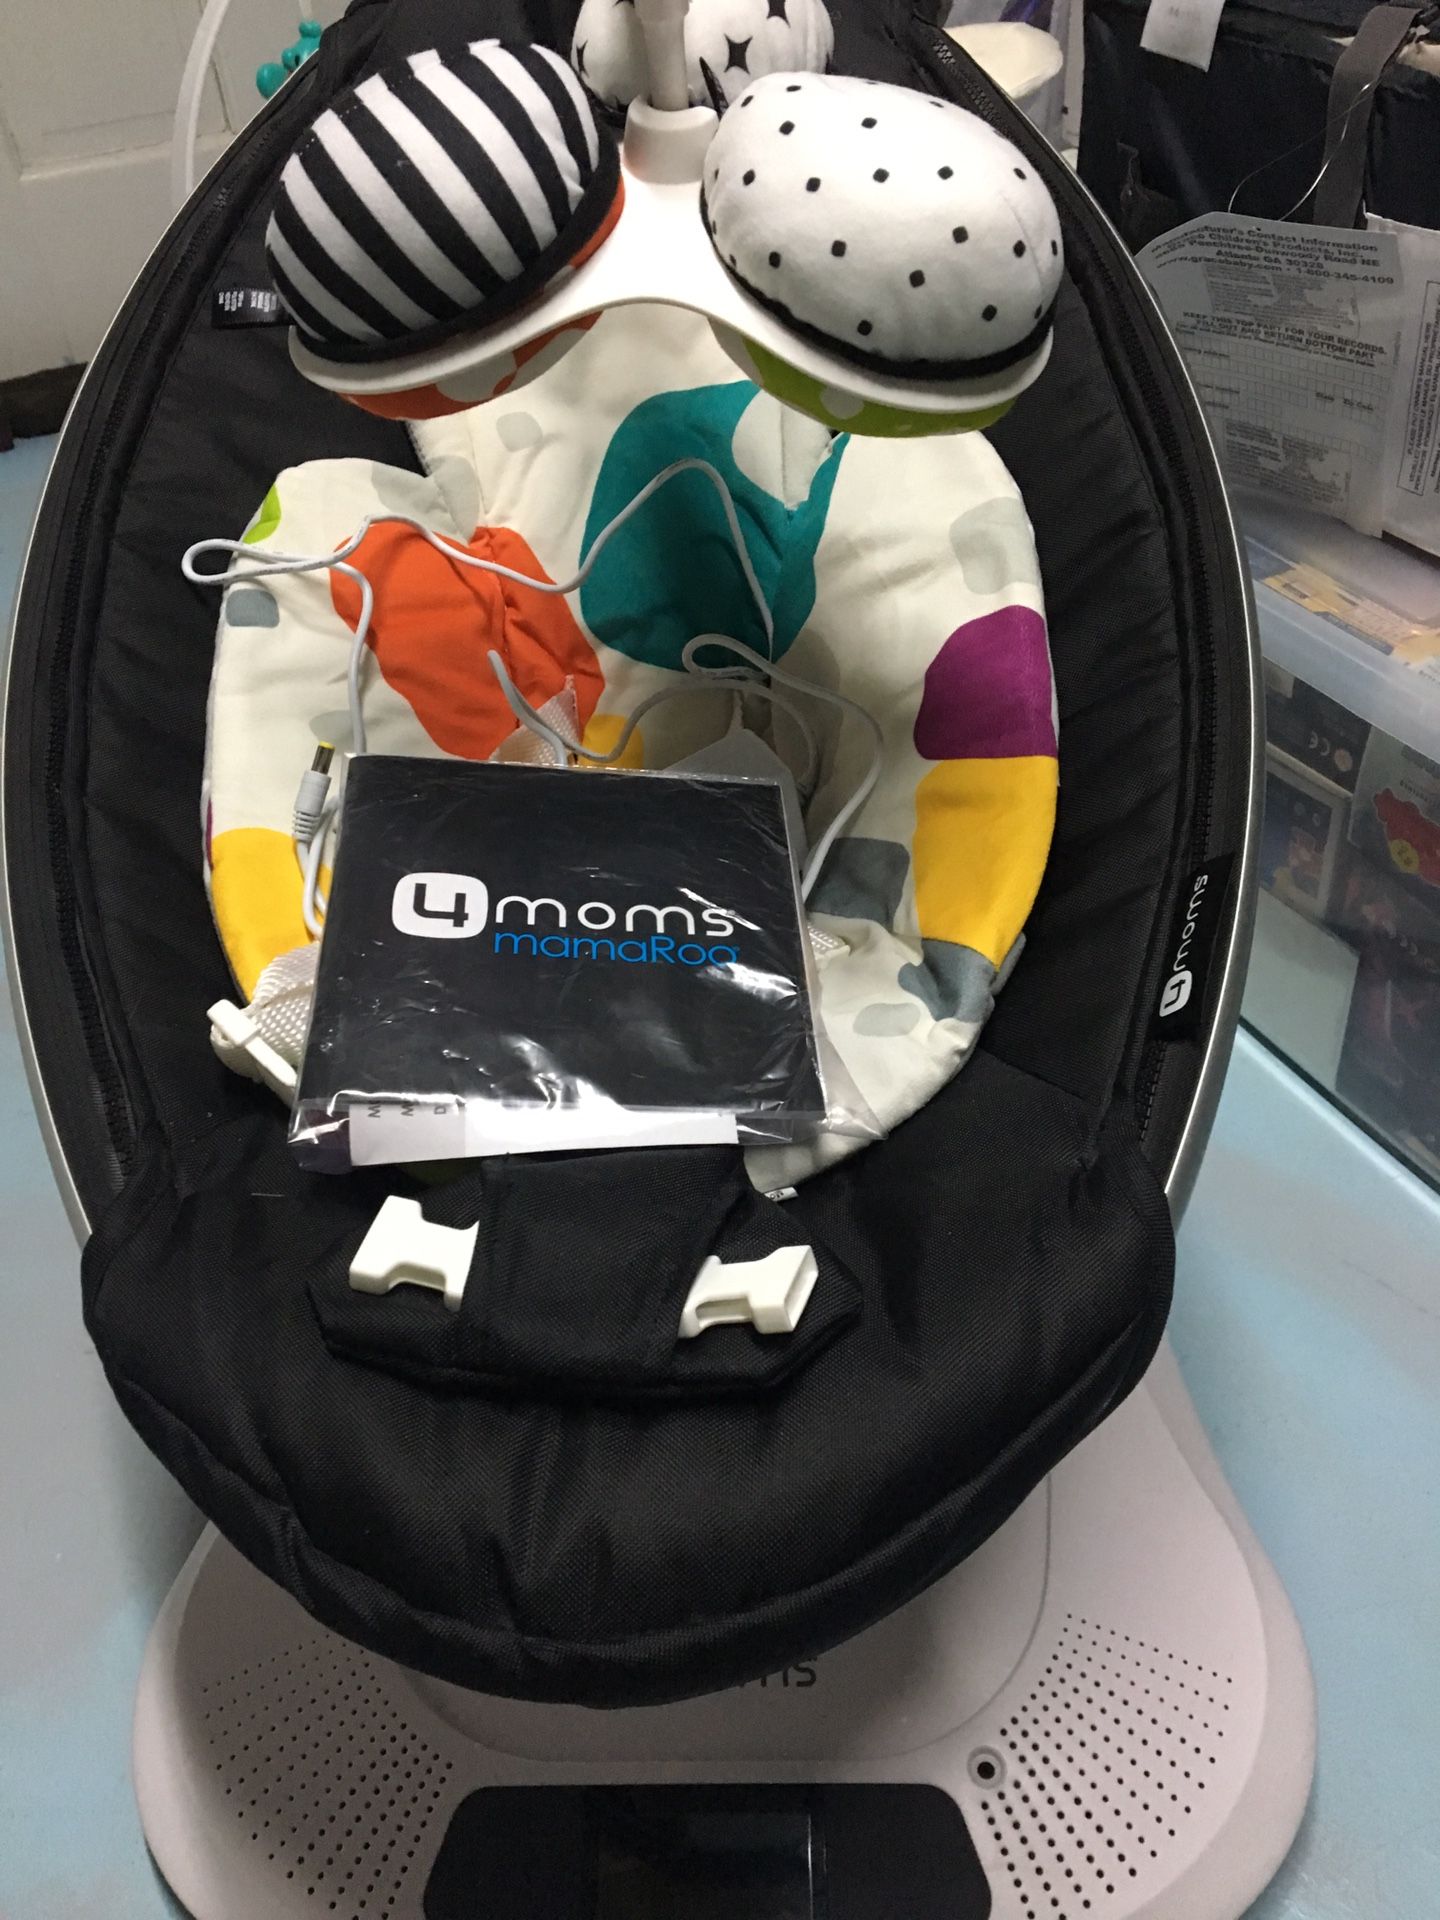 Mamaroo baby swing for sale ! Only $125 like new